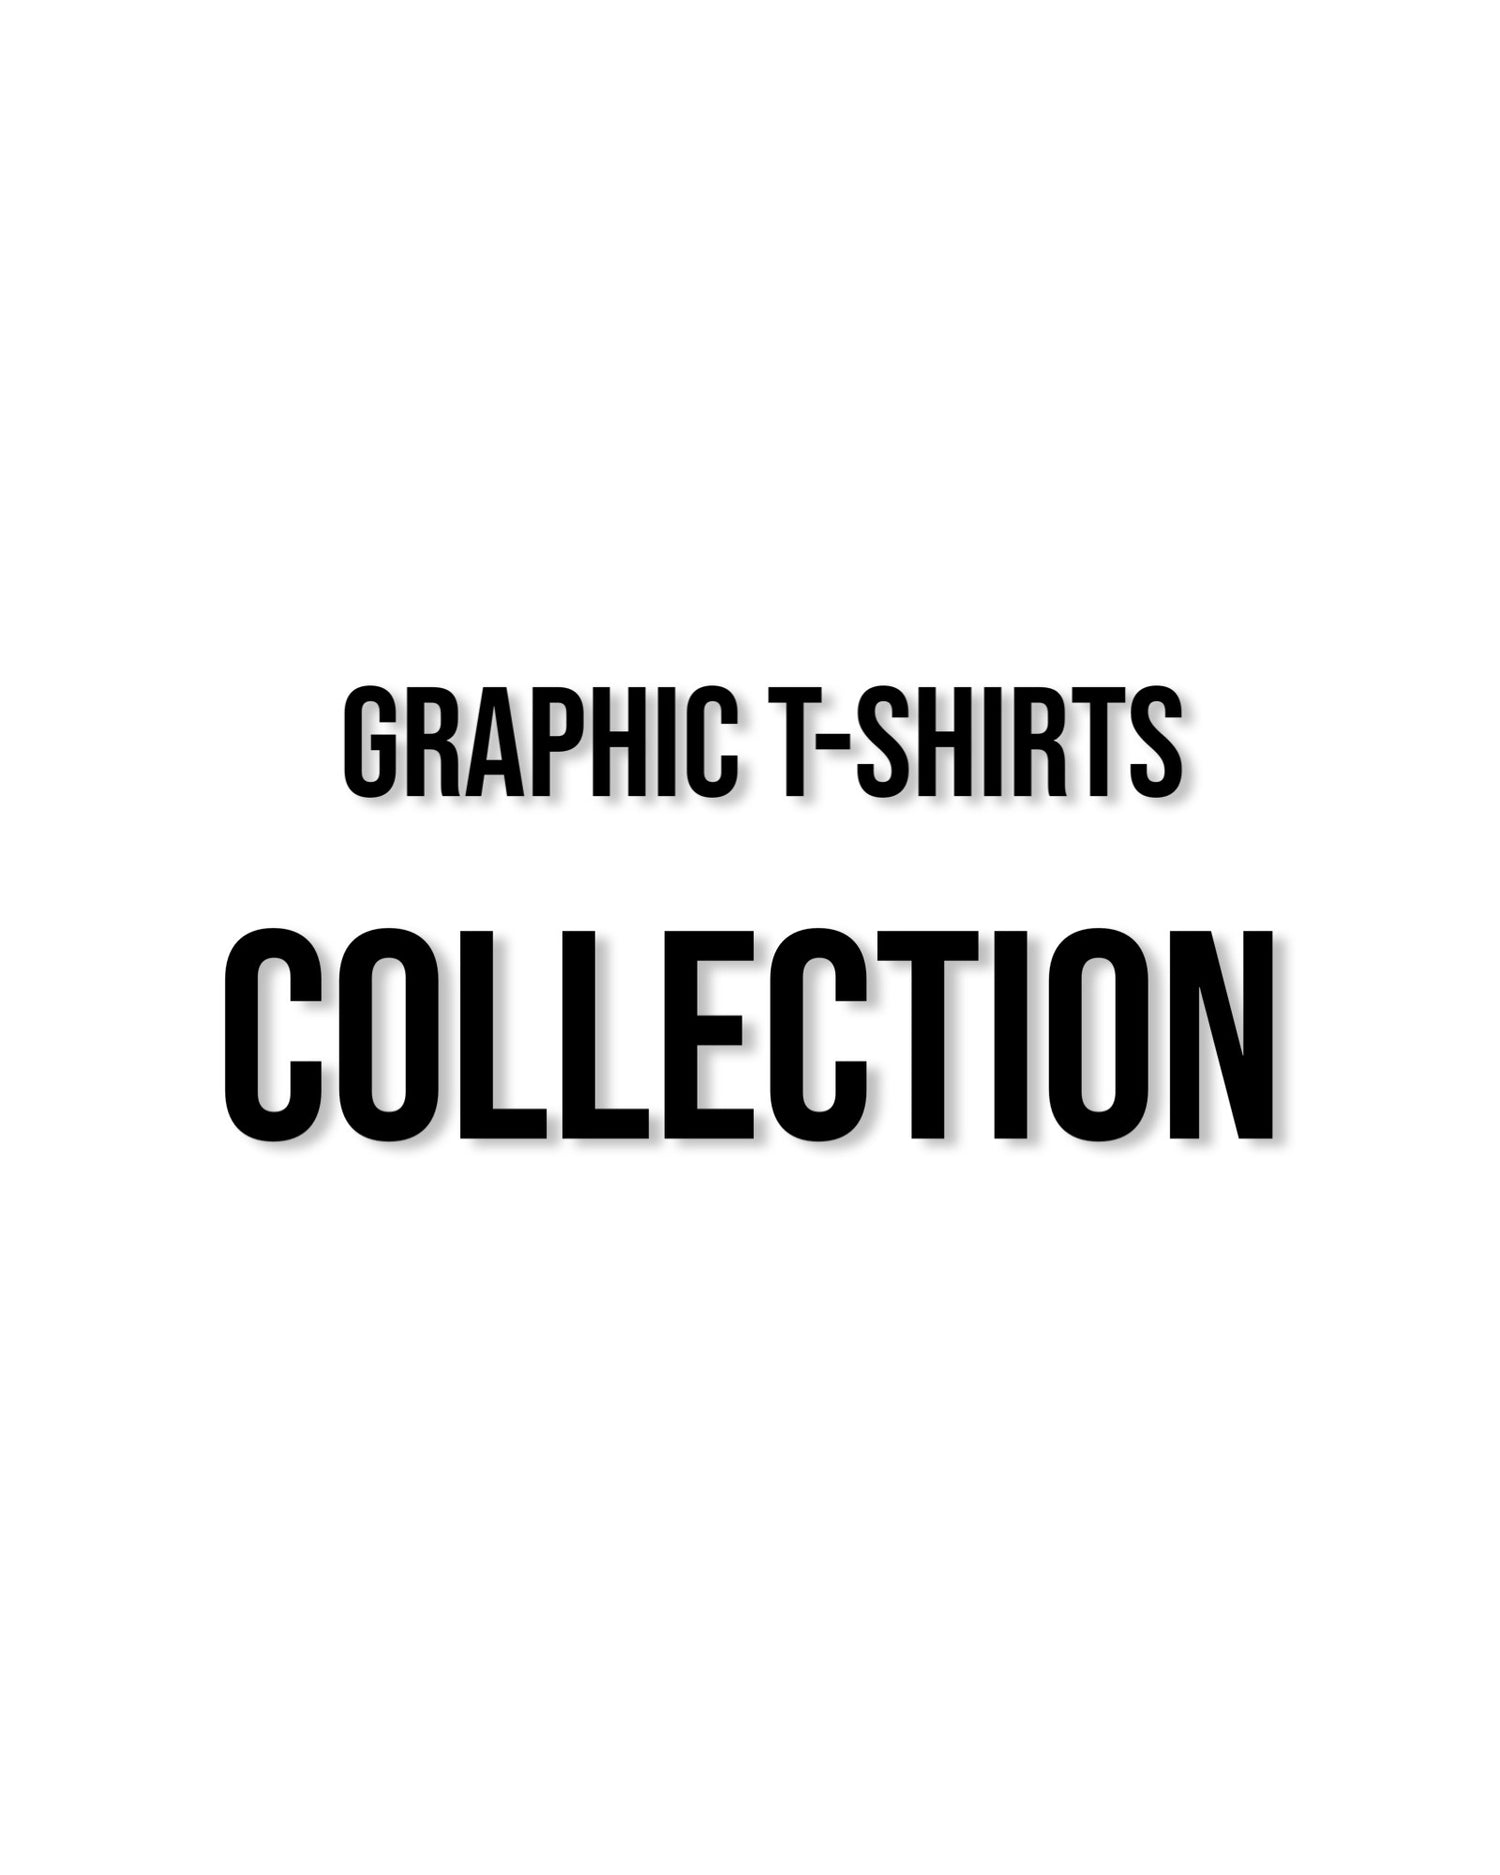 Graphic T-shirts collection